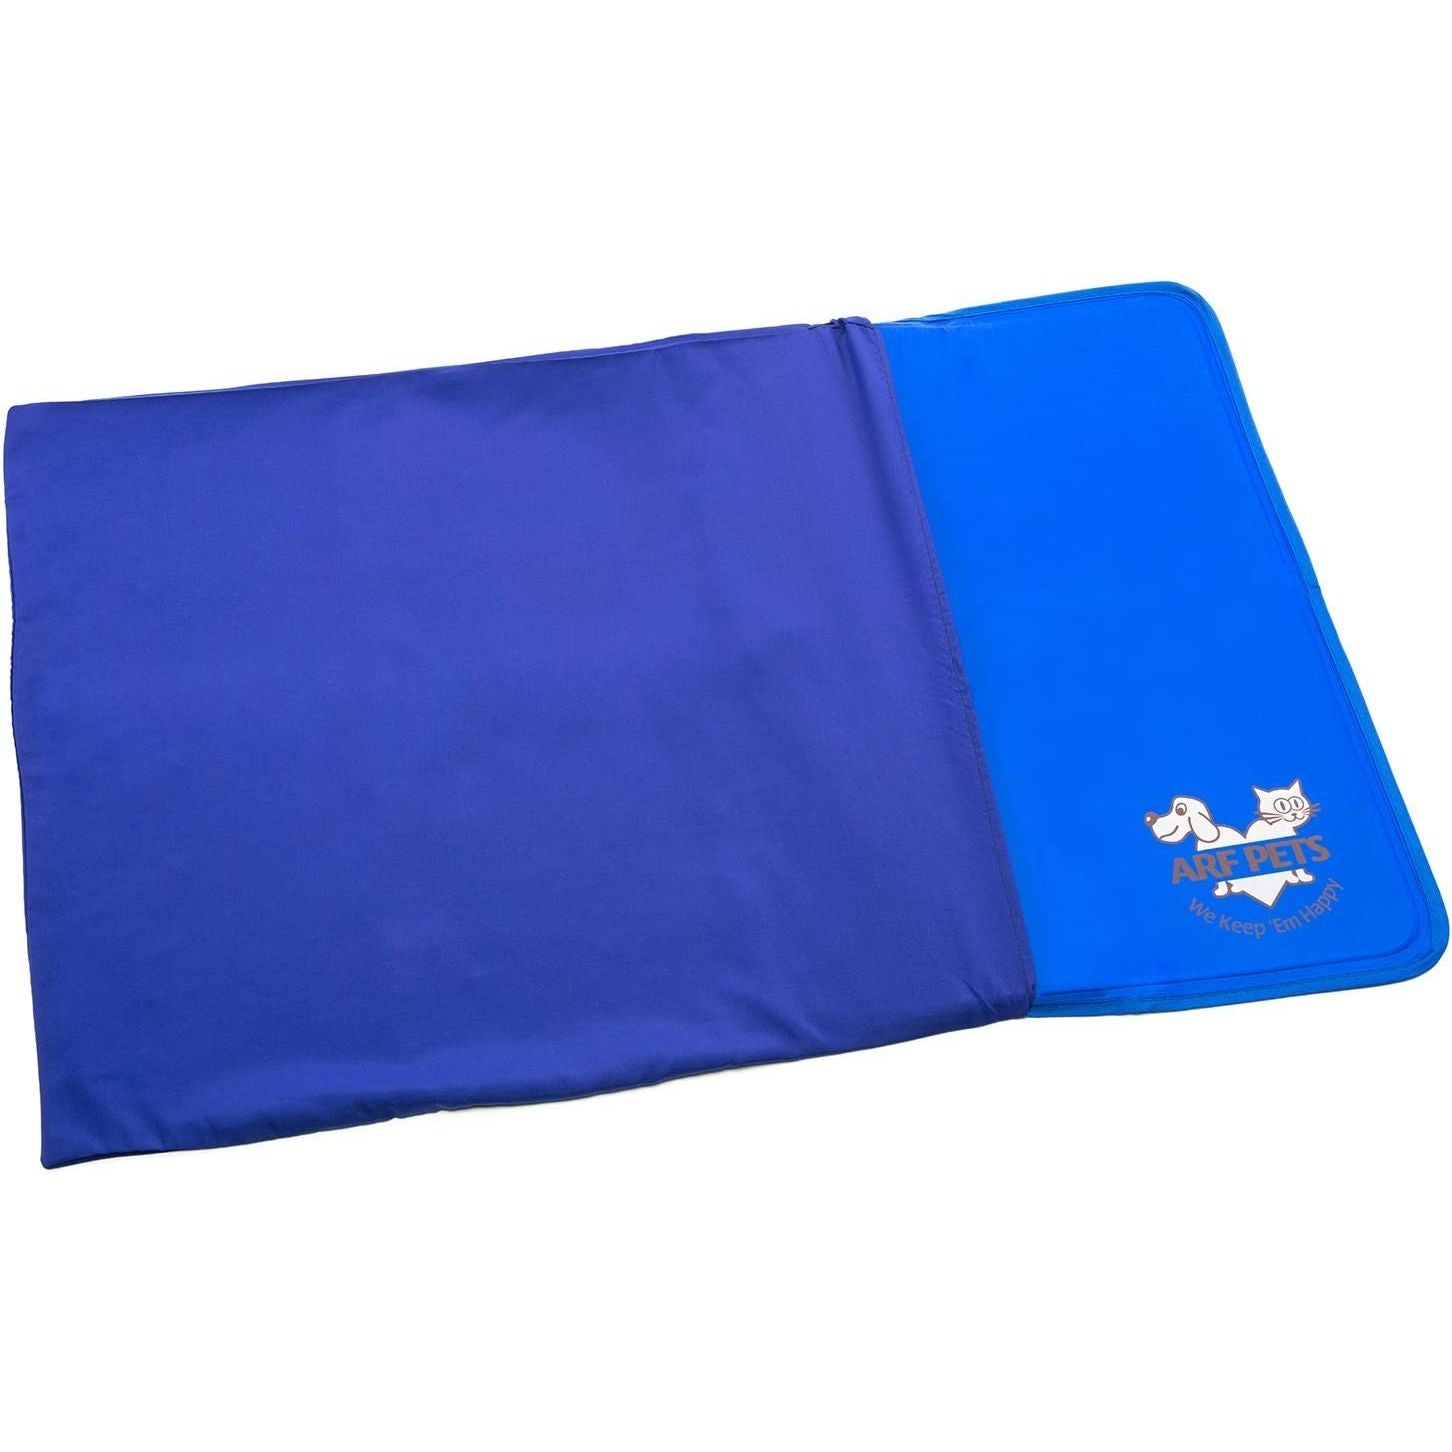 Arf Pets Cooling Mat Protector and Cover - Small Pets 23x35